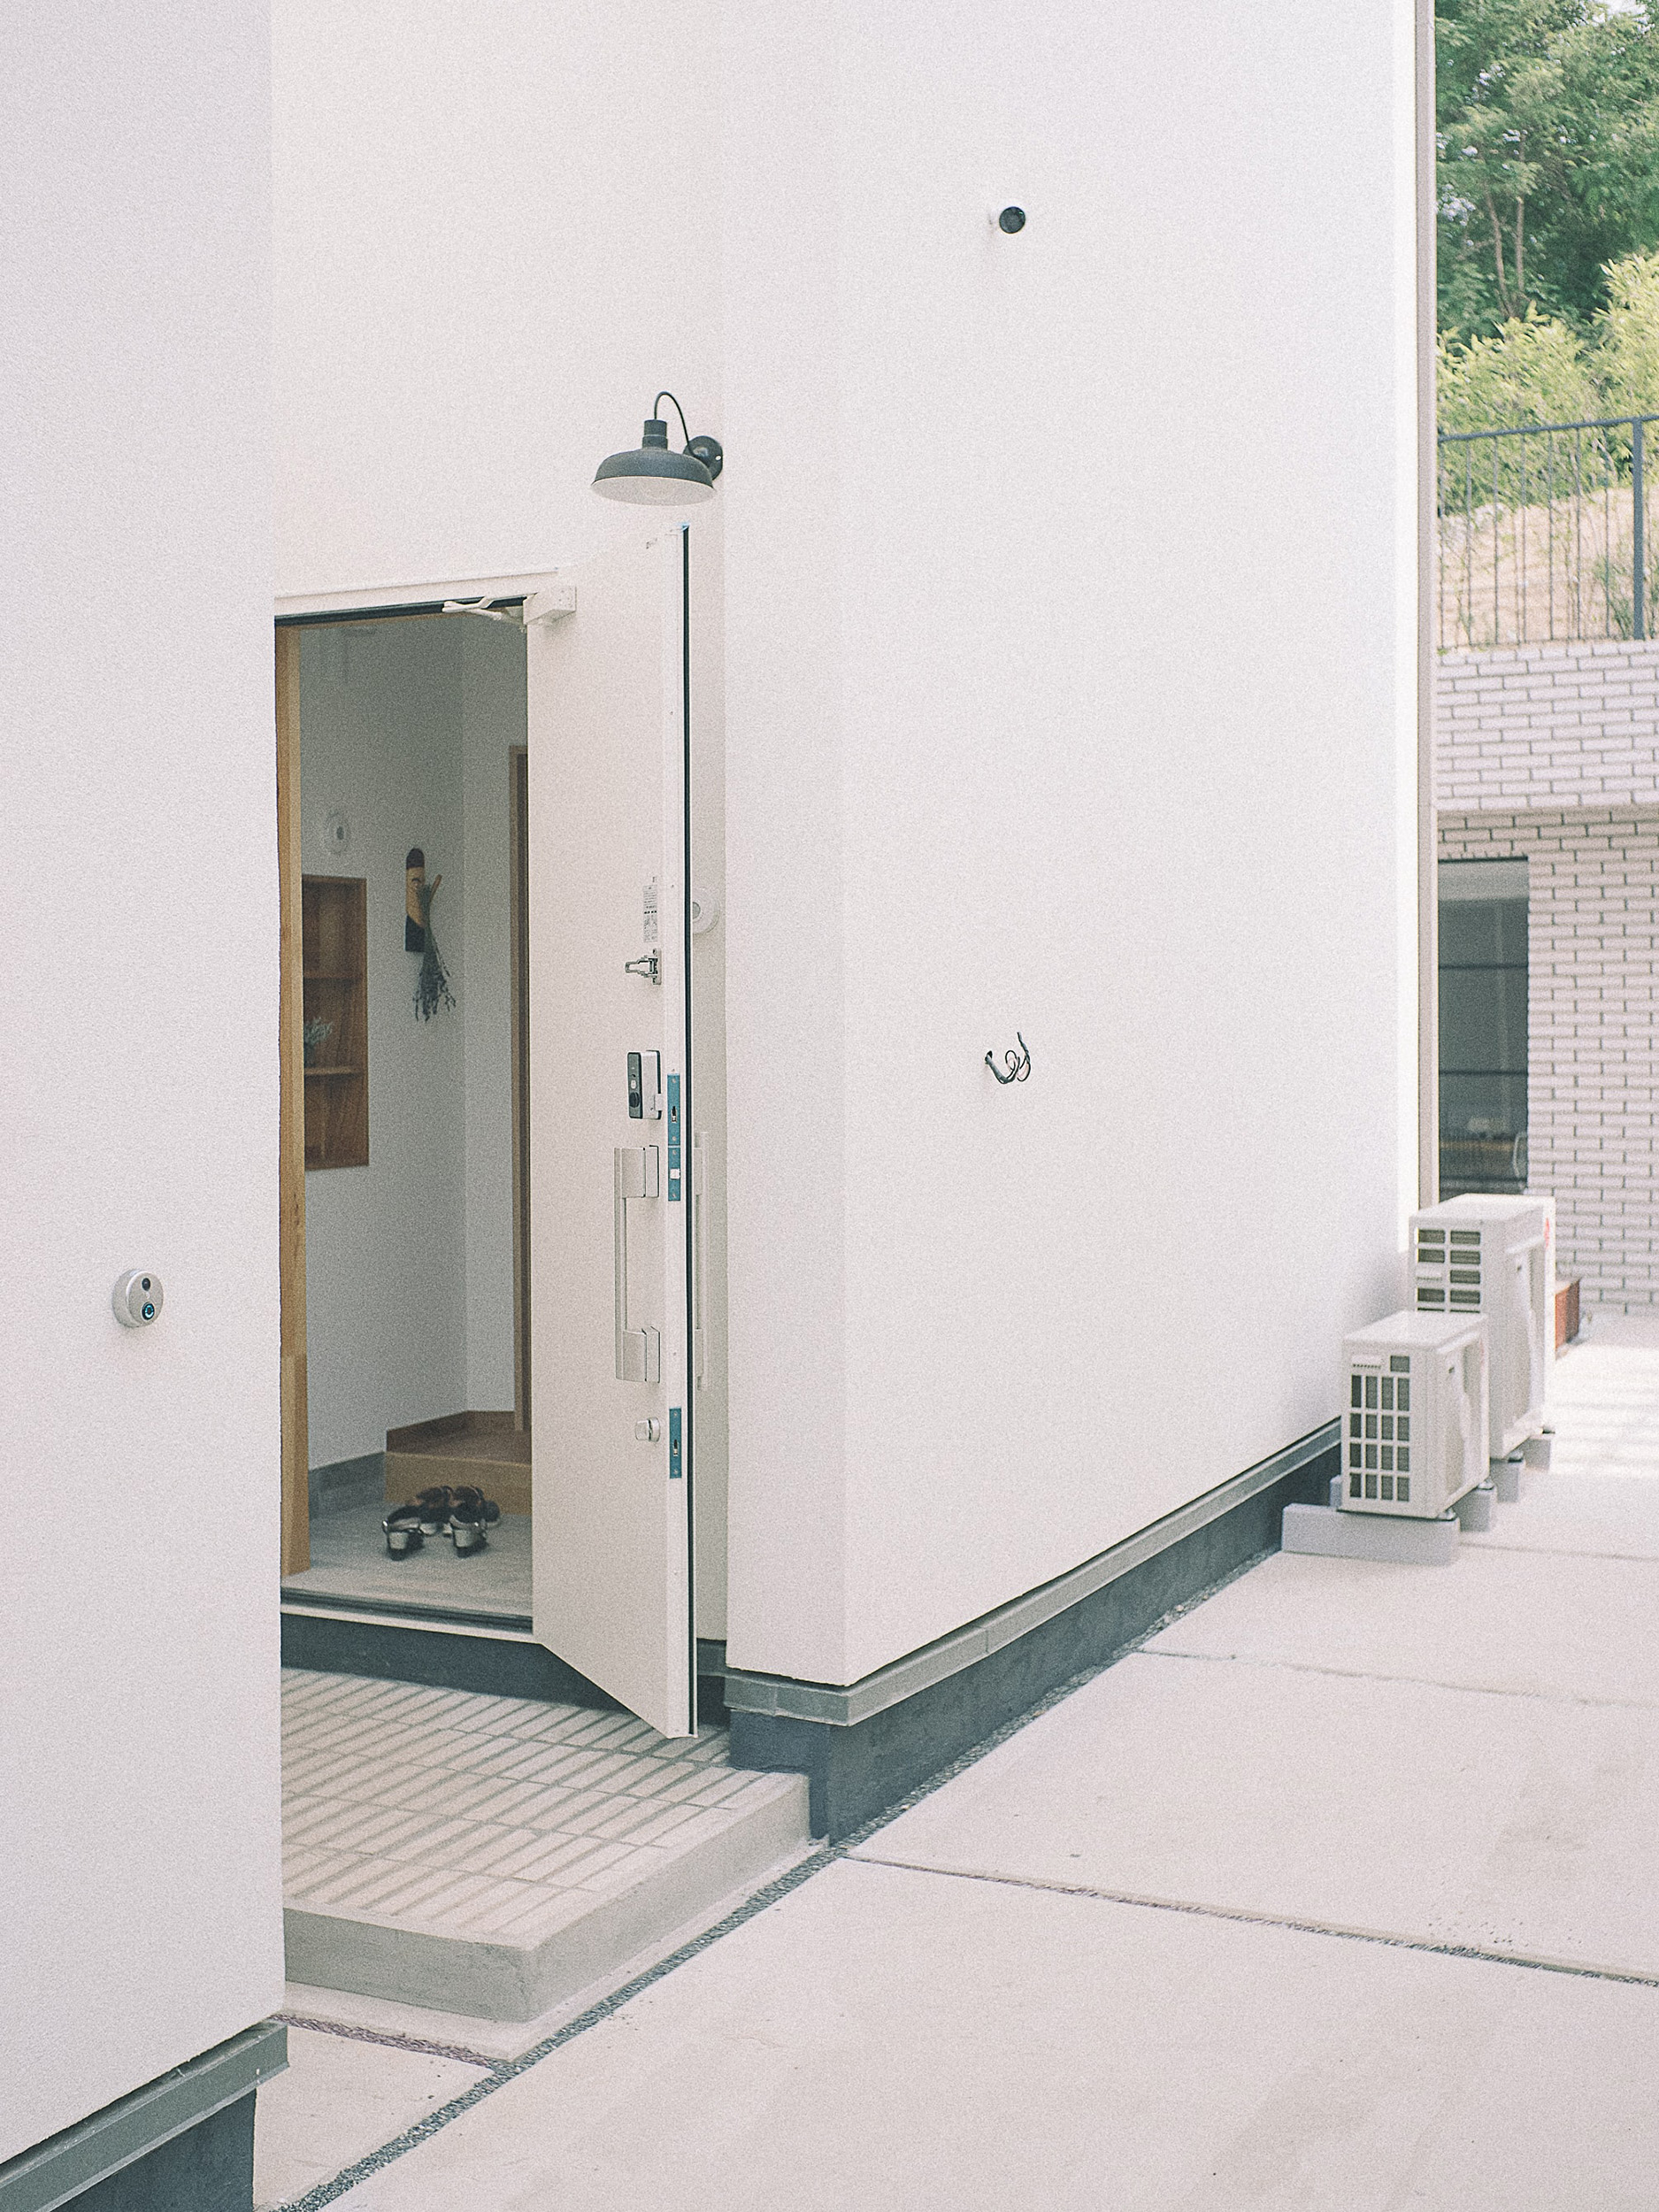 Modern white concrete building with open door